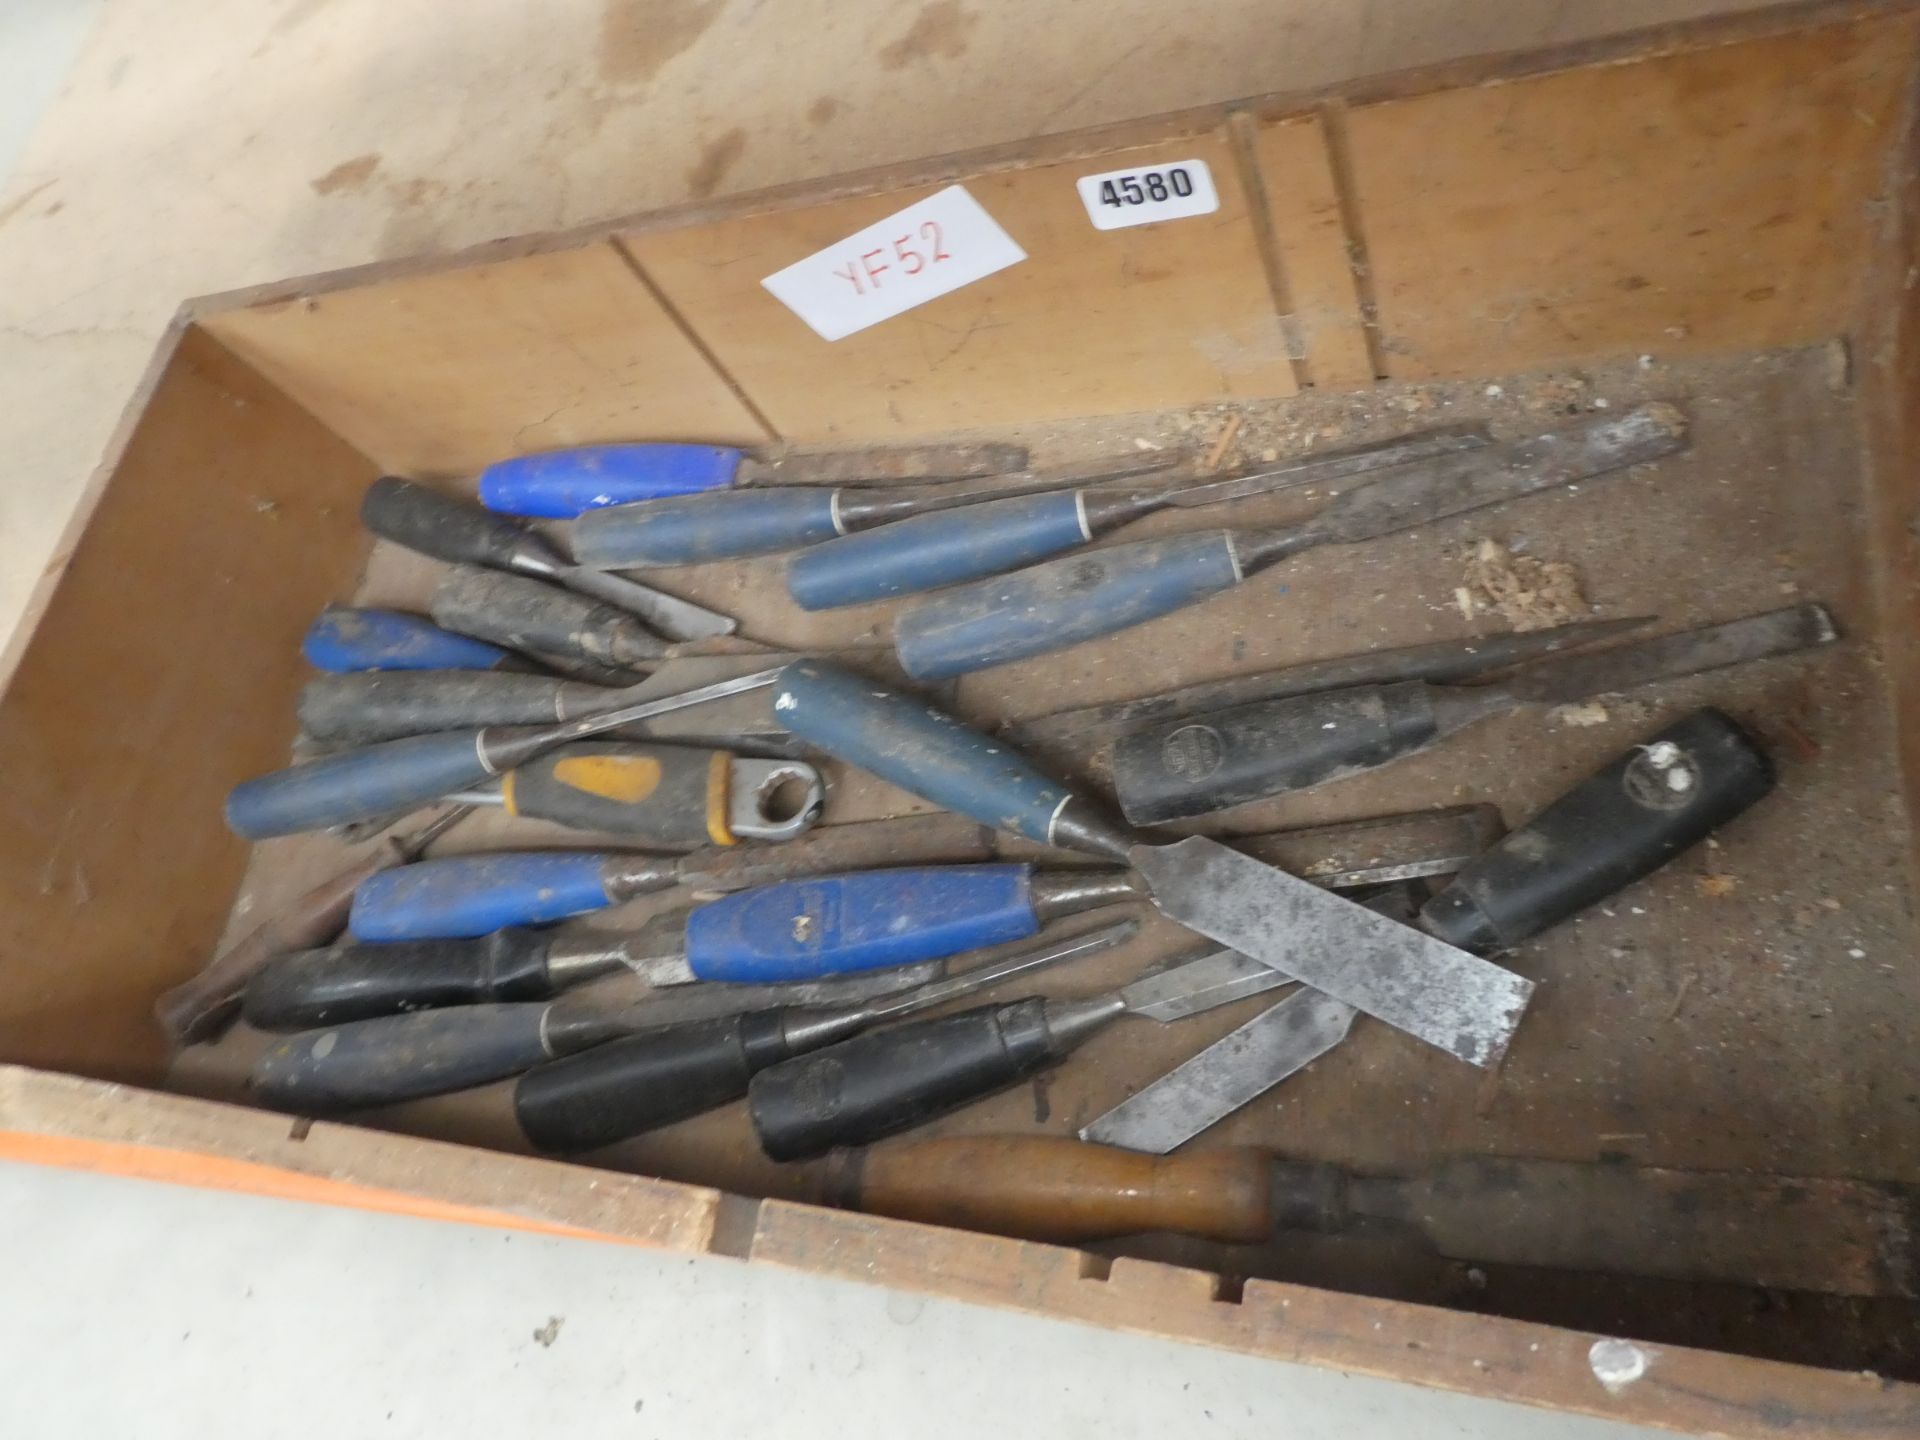 Wodoen drawer containing chisels and spanner